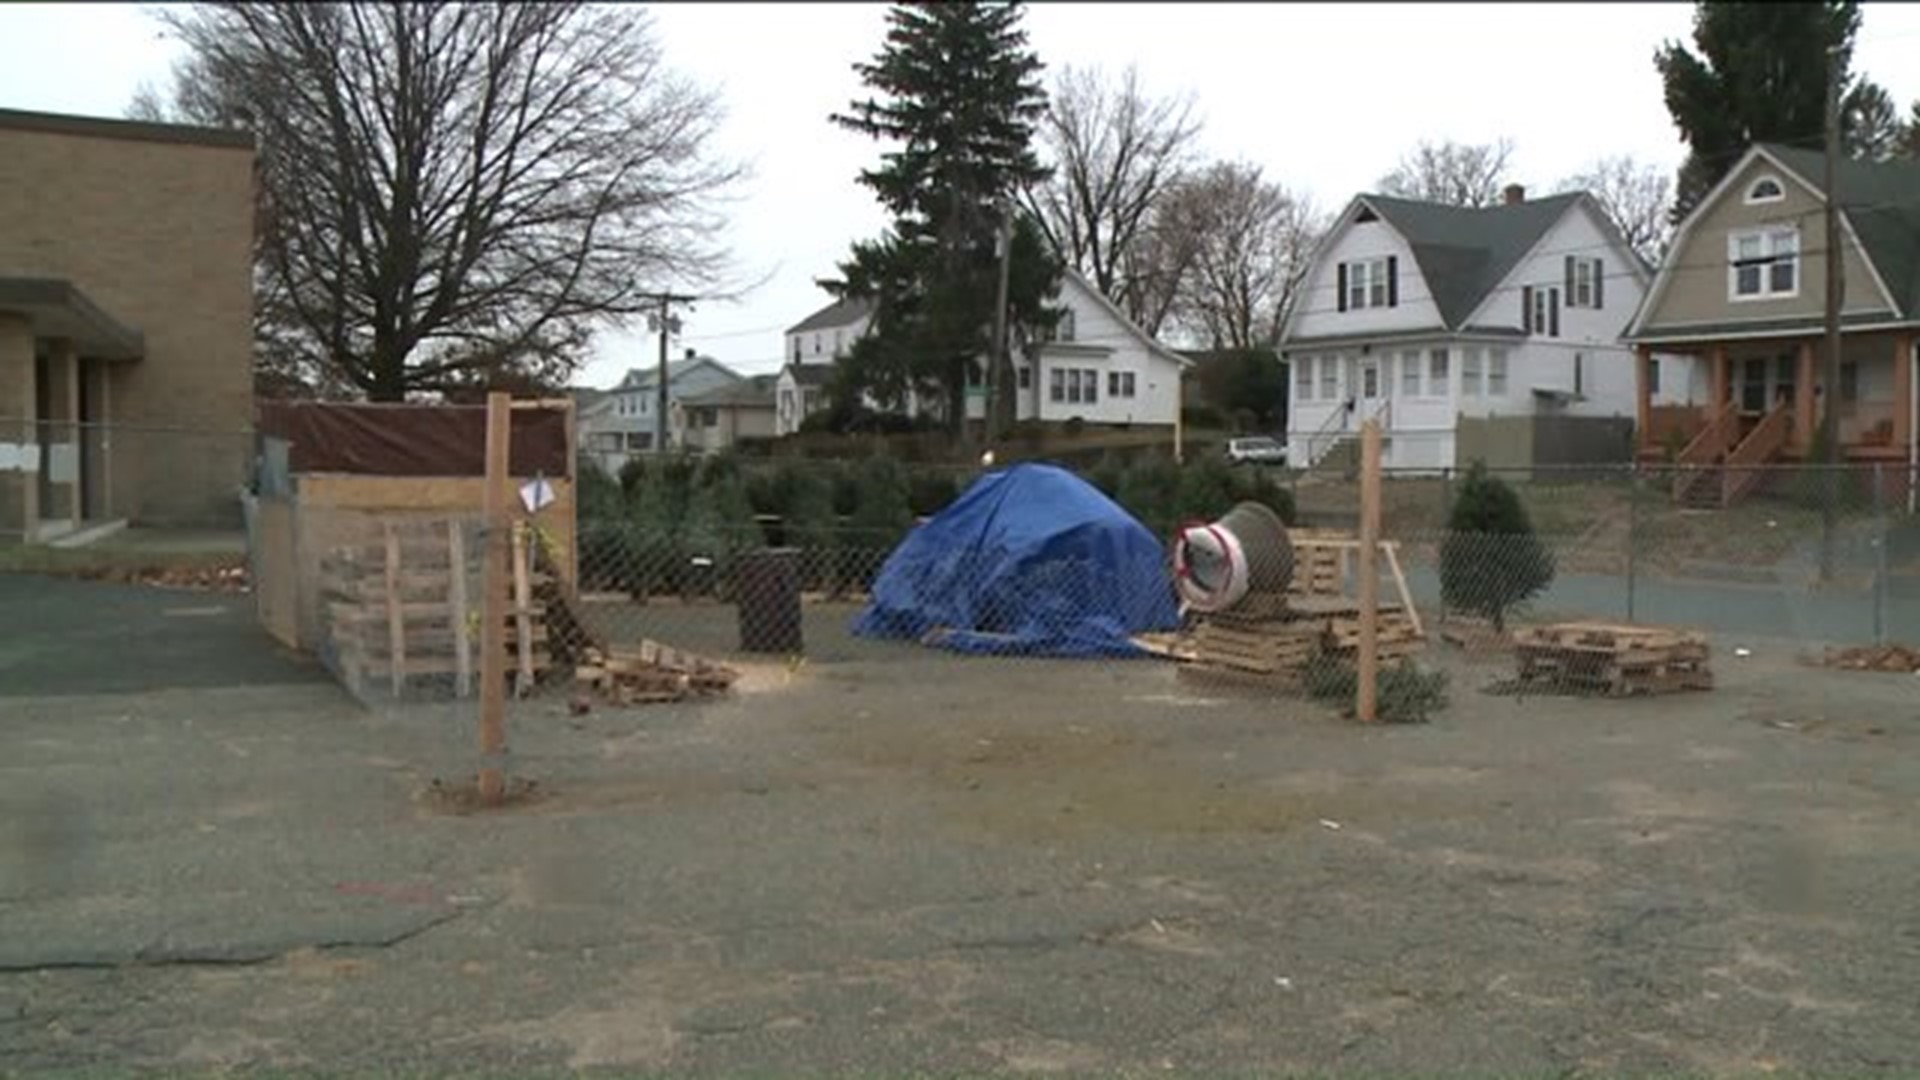 Waterbury school at a loss after fundraising Christmas trees stolen